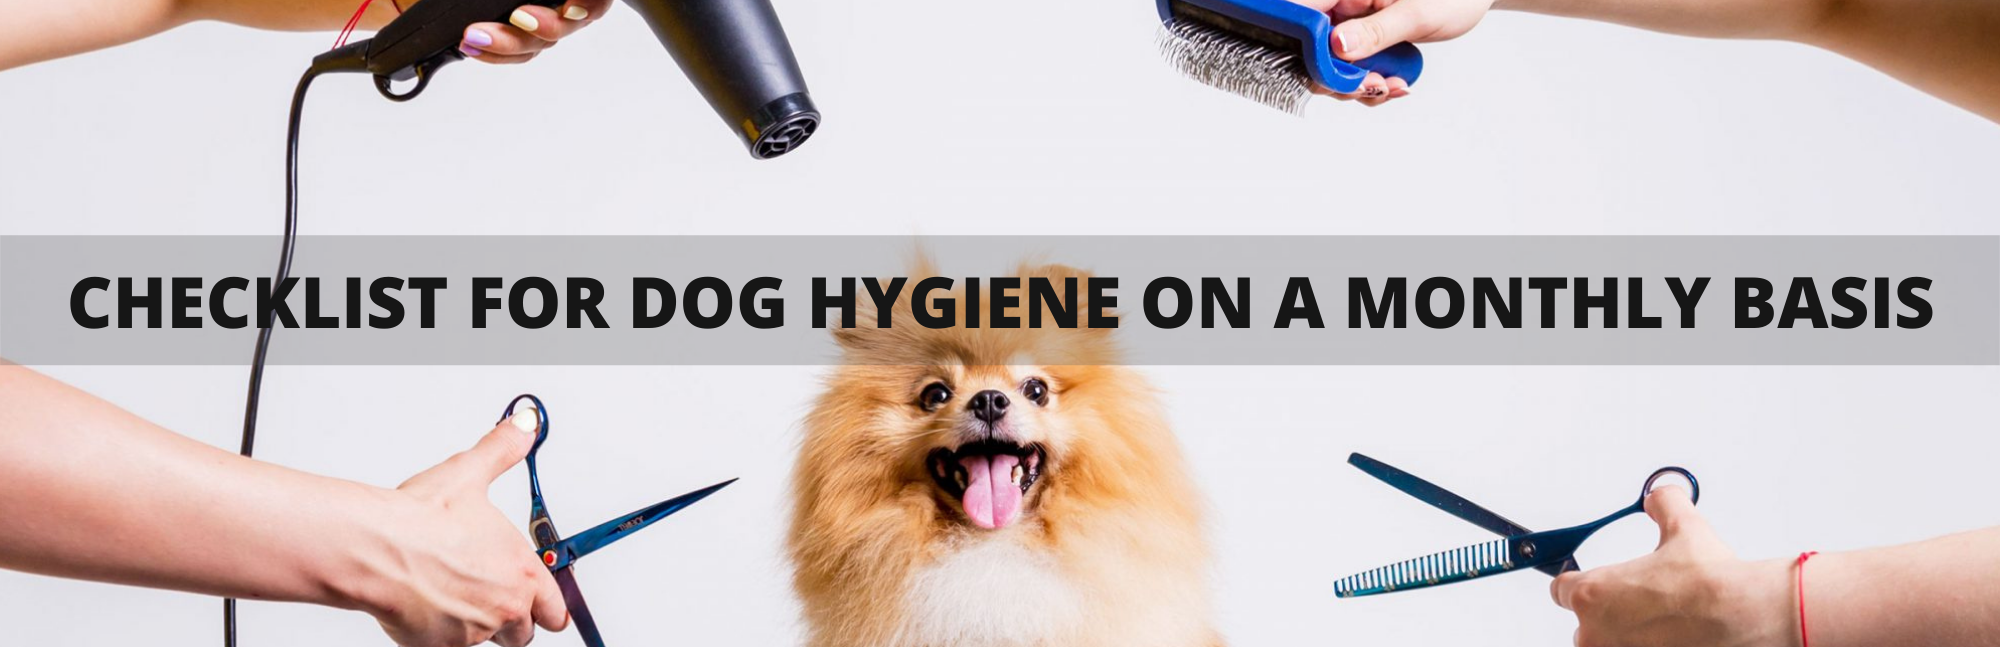 Checklist For Dog Hygiene On A Monthly Basis